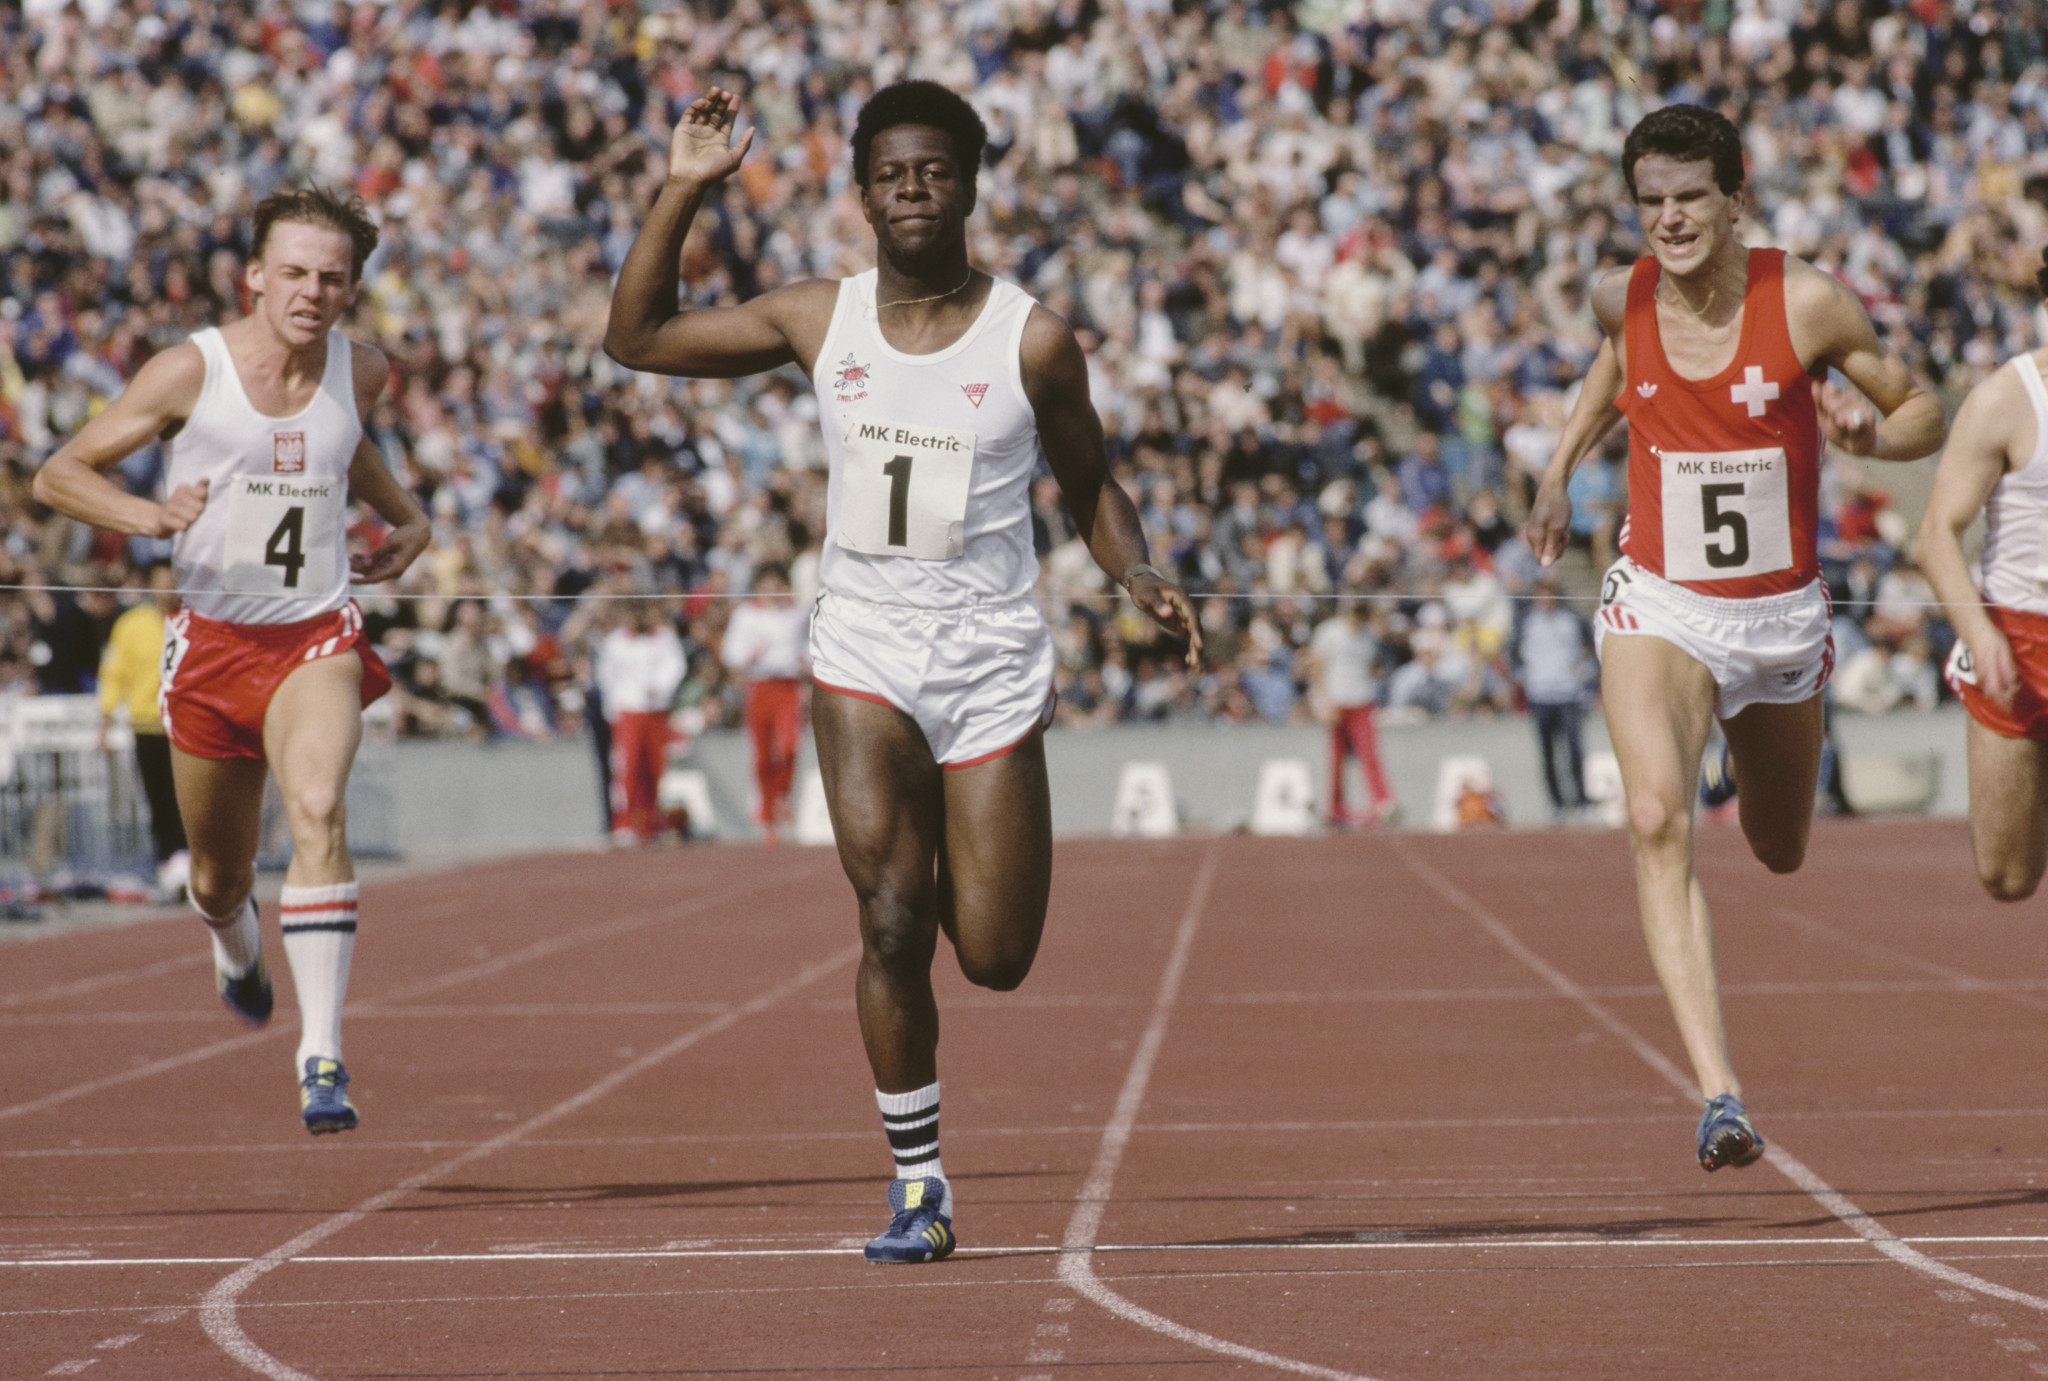 Mike McFarlane, who died last week aged 63, was a bemedalled sprinter and beloved coach ©Getty Images